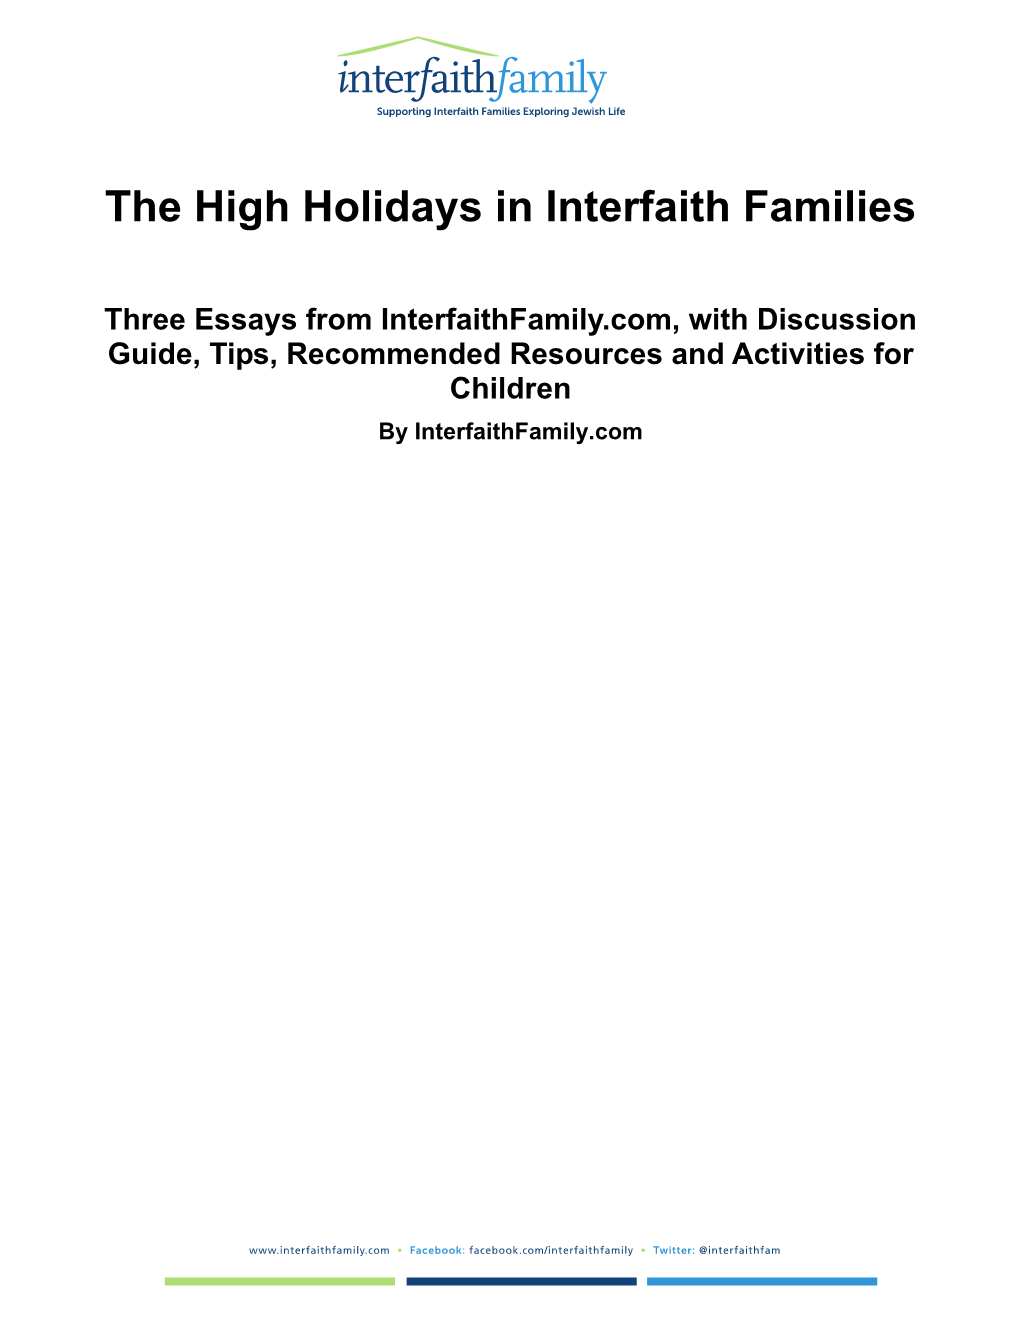 The High Holidays in Interfaith Families